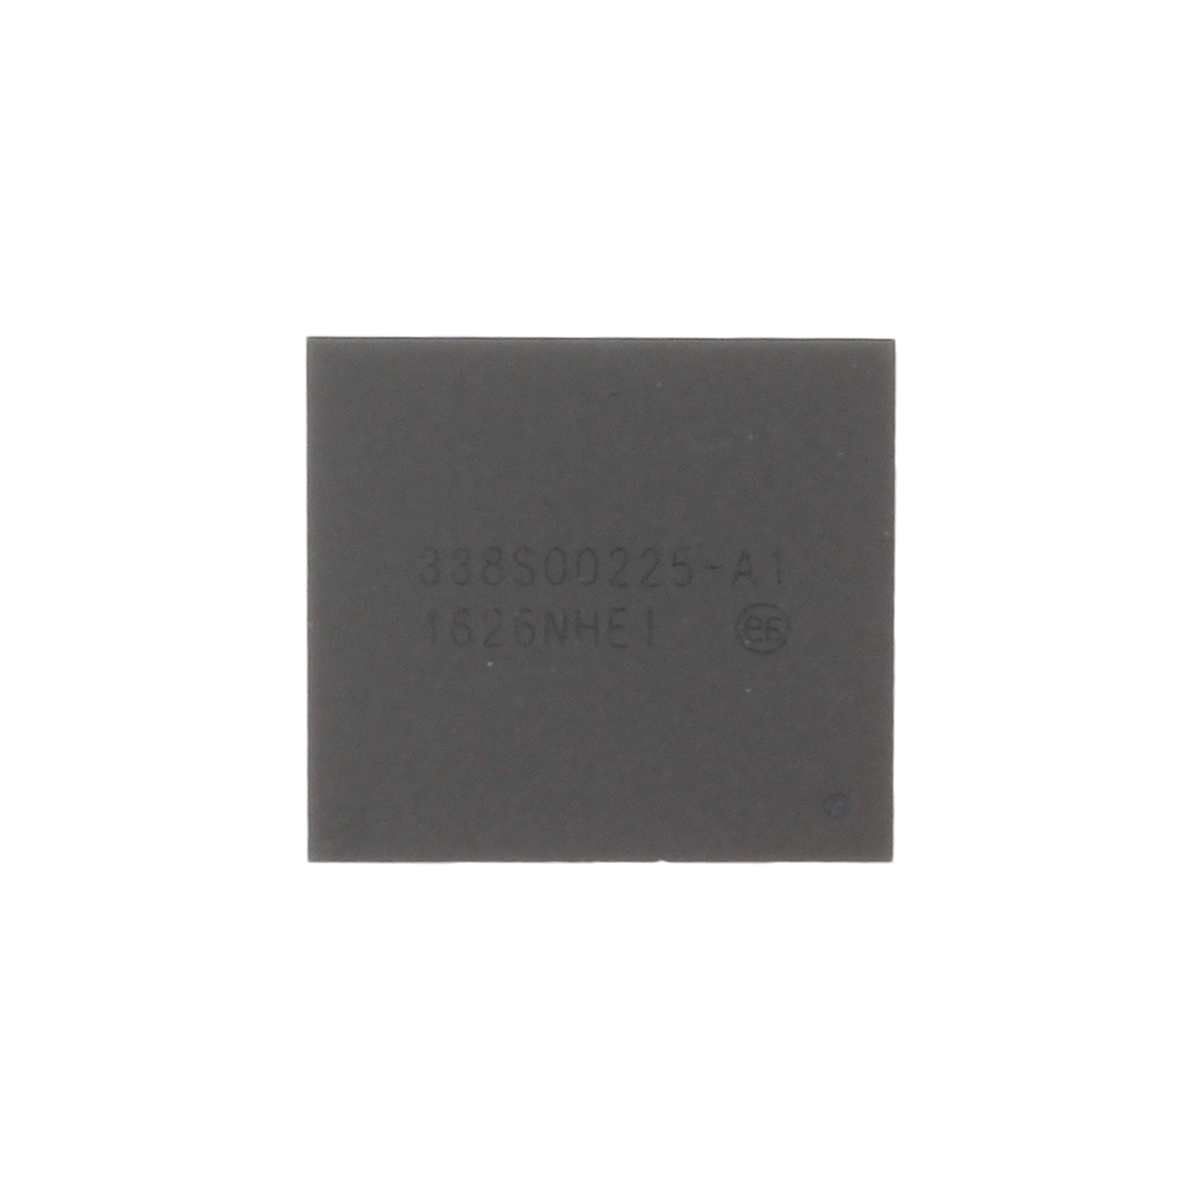 IC-Chip Power Management 338S00225, Compatible with iPhone 7/7Plus